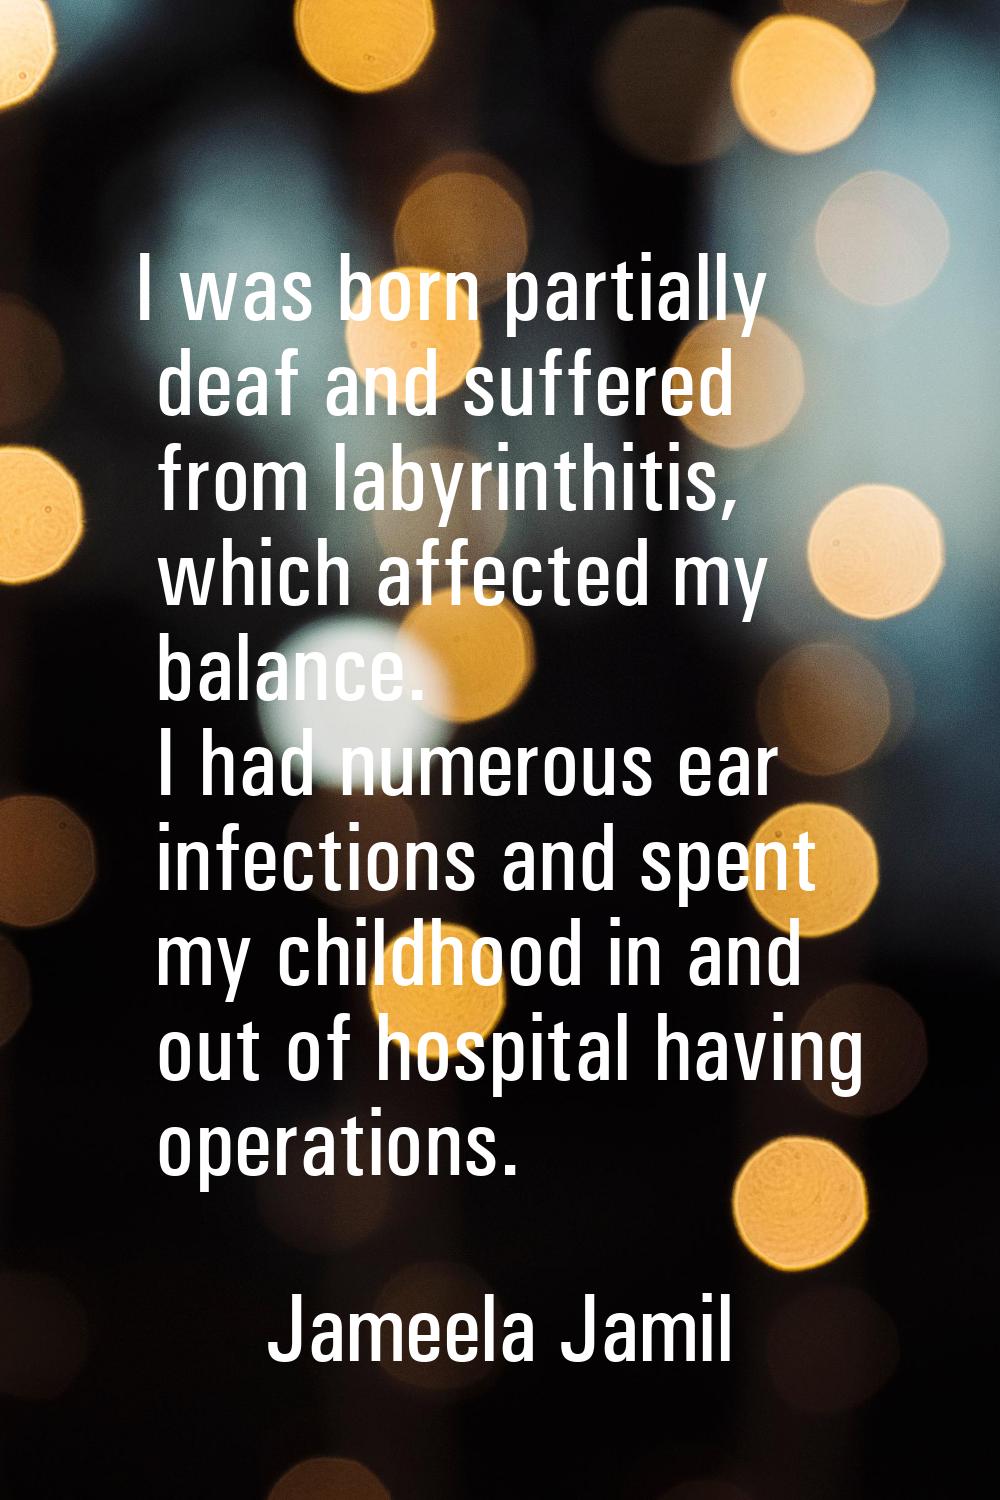 I was born partially deaf and suffered from labyrinthitis, which affected my balance. I had numerou